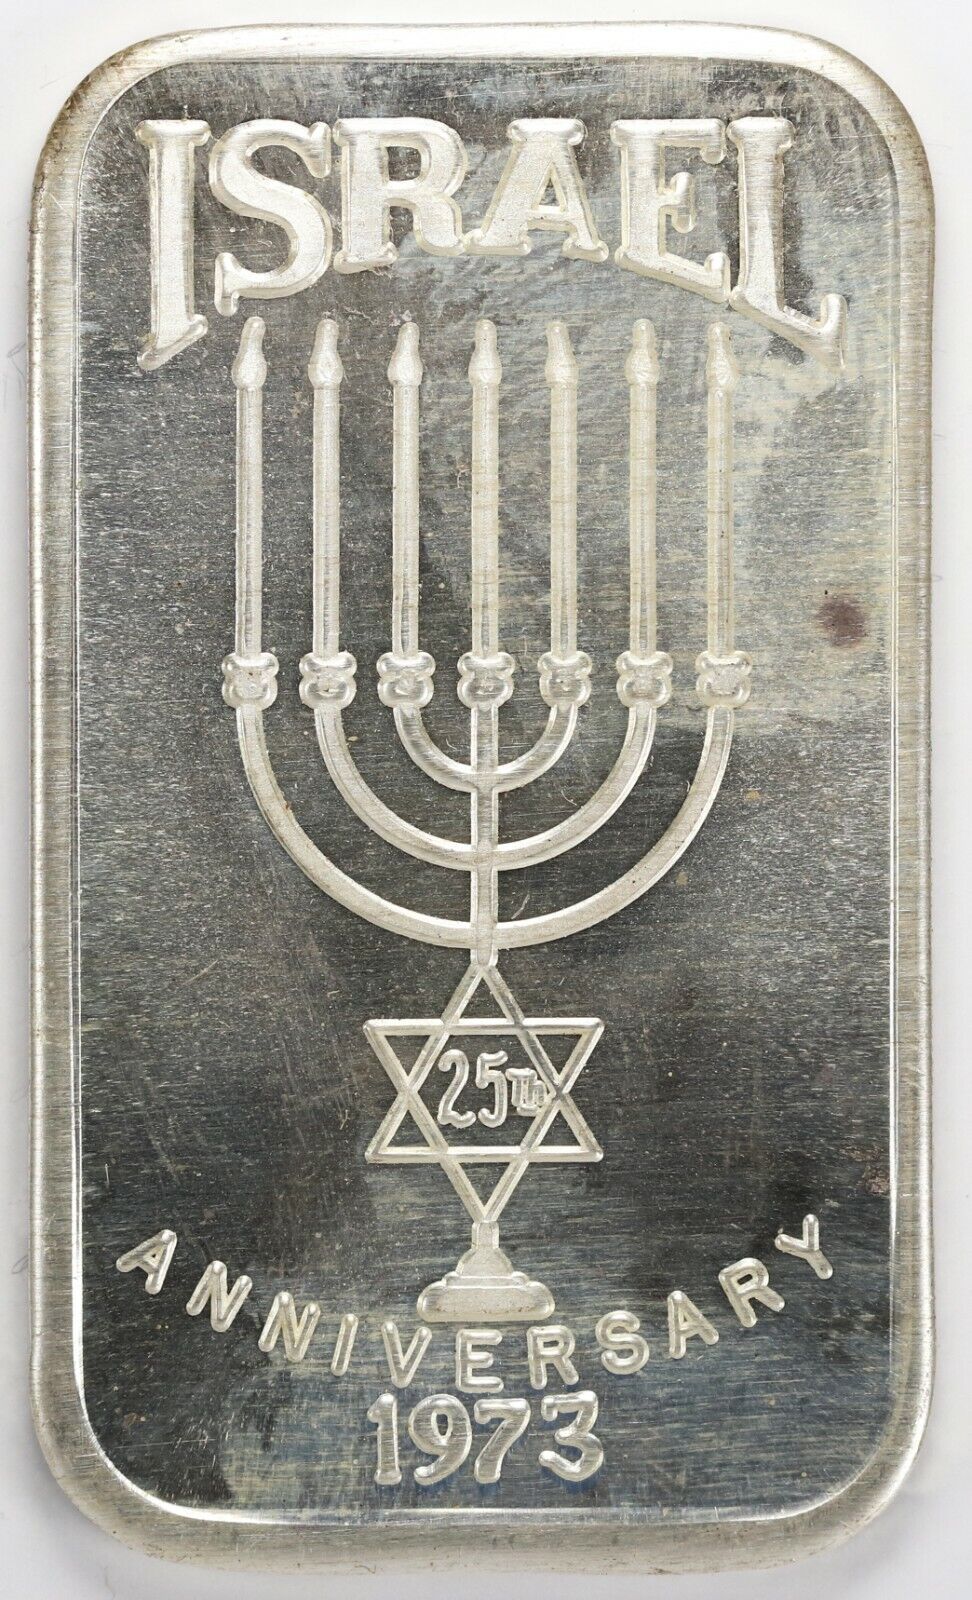 1973 Mother Lode security Mint Israel 25th Silver Bar Art 1oz Anniversary Great interest